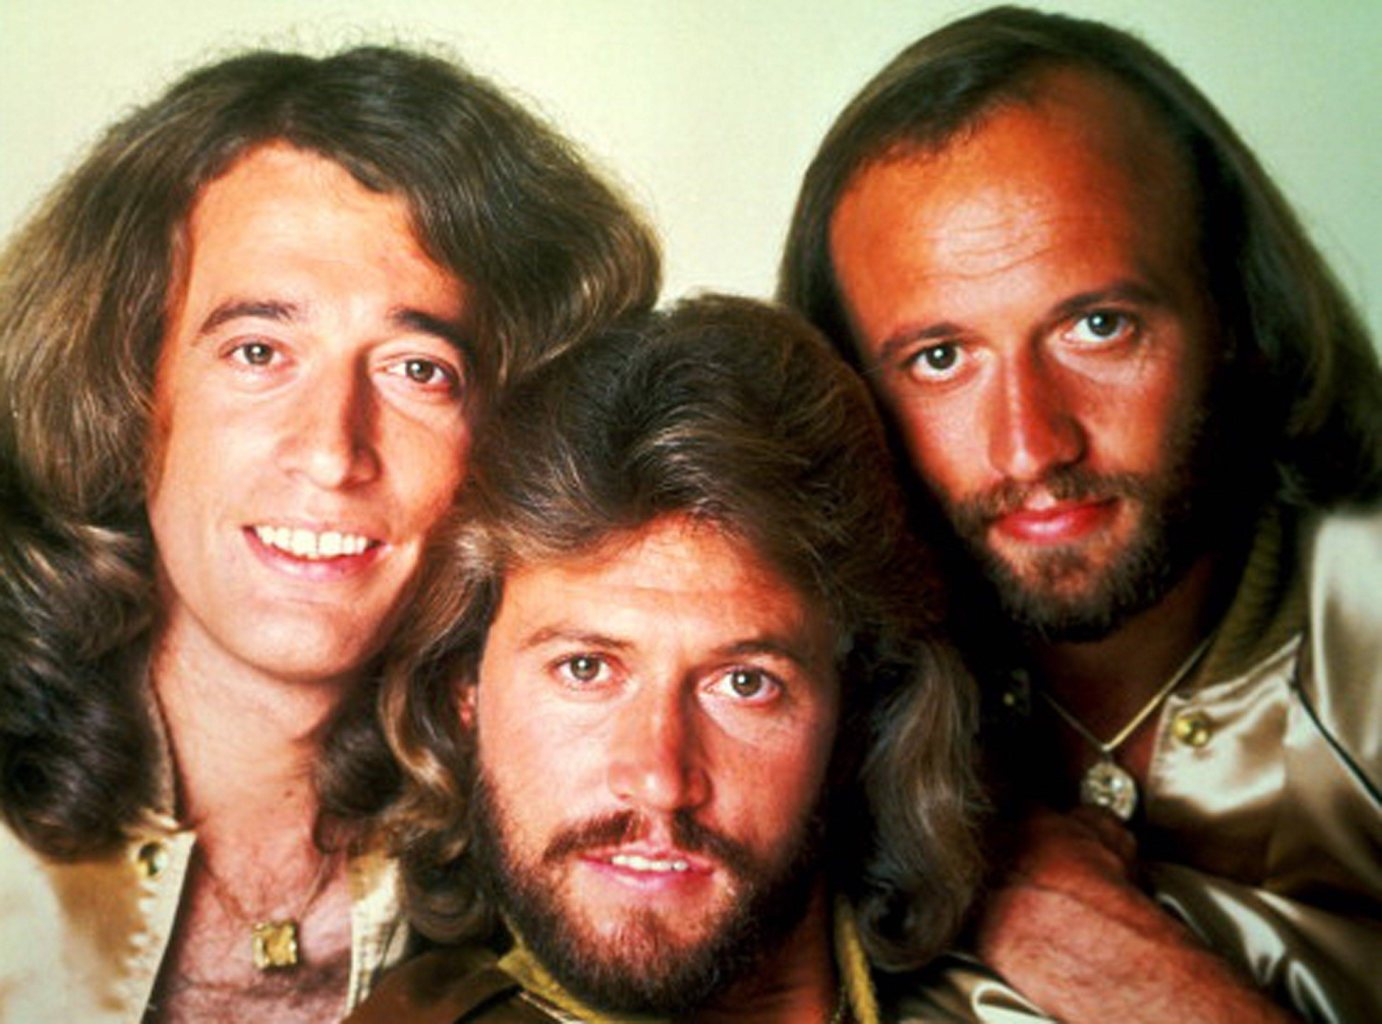 Have Fun Image The Bee Gees HD Wallpaper And Background Photos